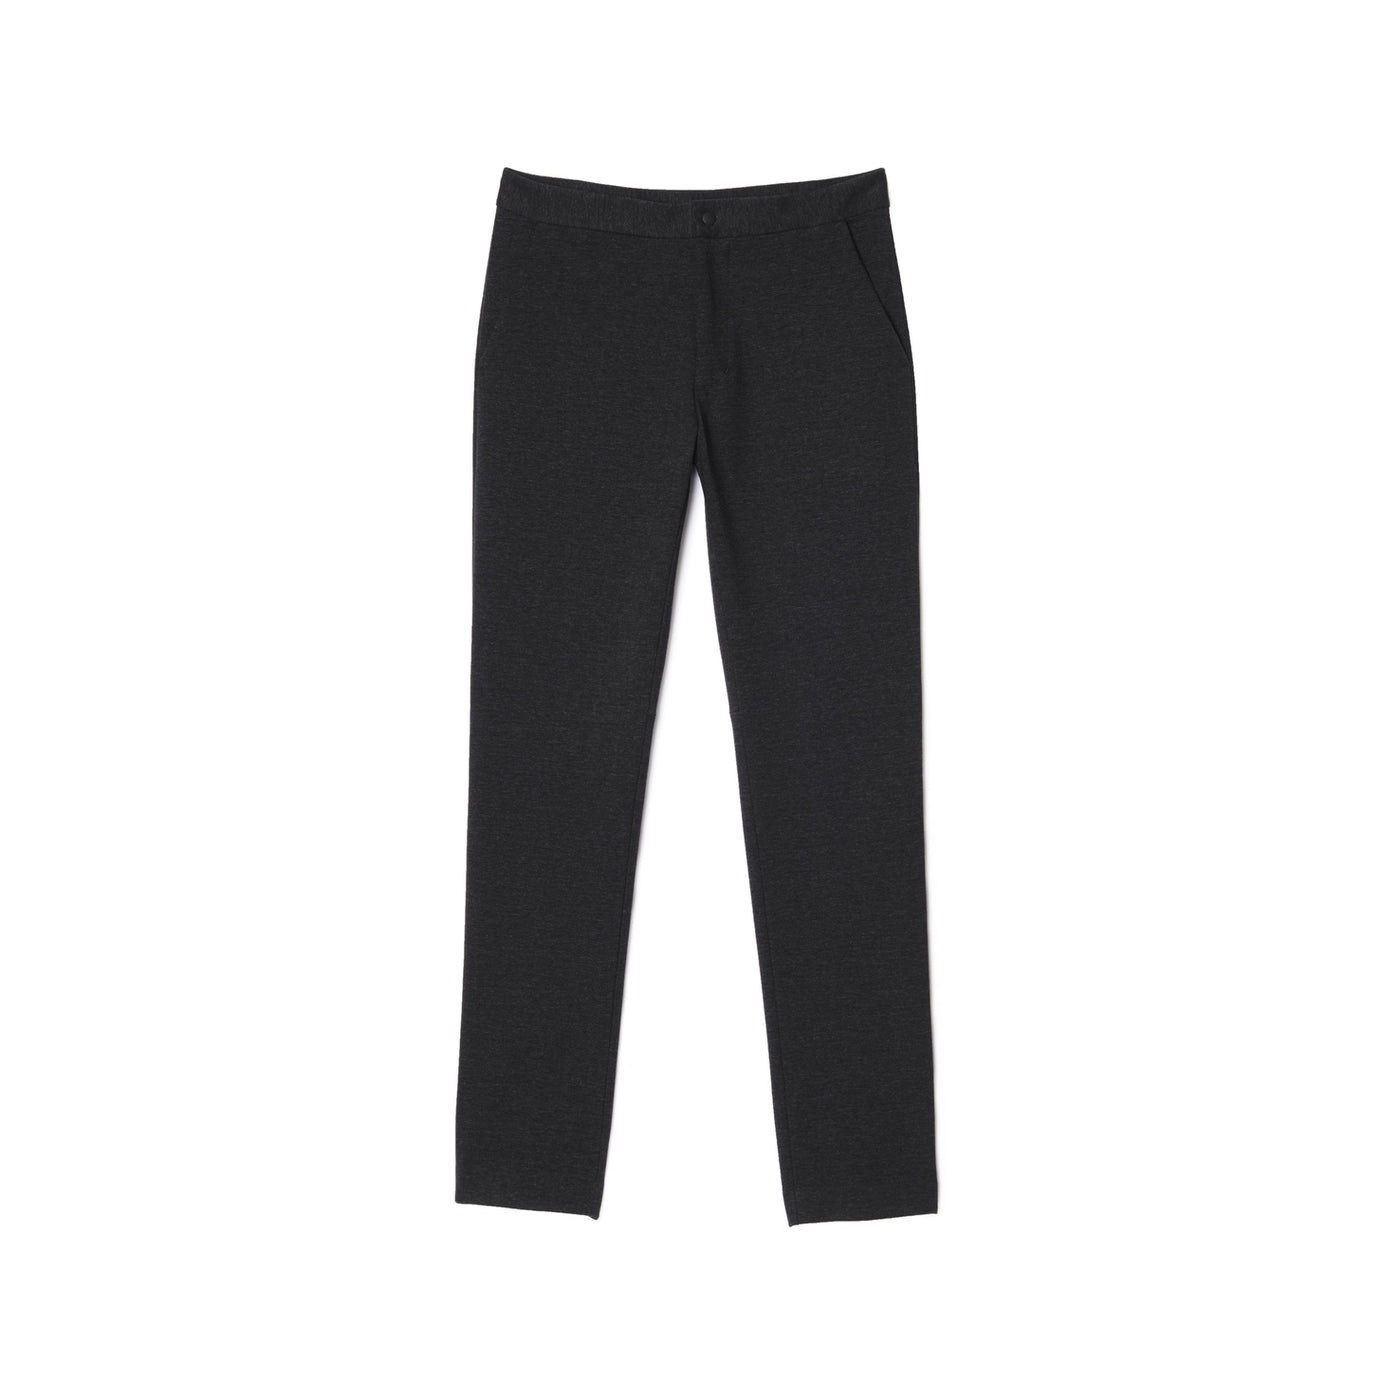 Shop The Latest Collection Of Lacoste Chino Trousers - Hh4178 In Lebanon